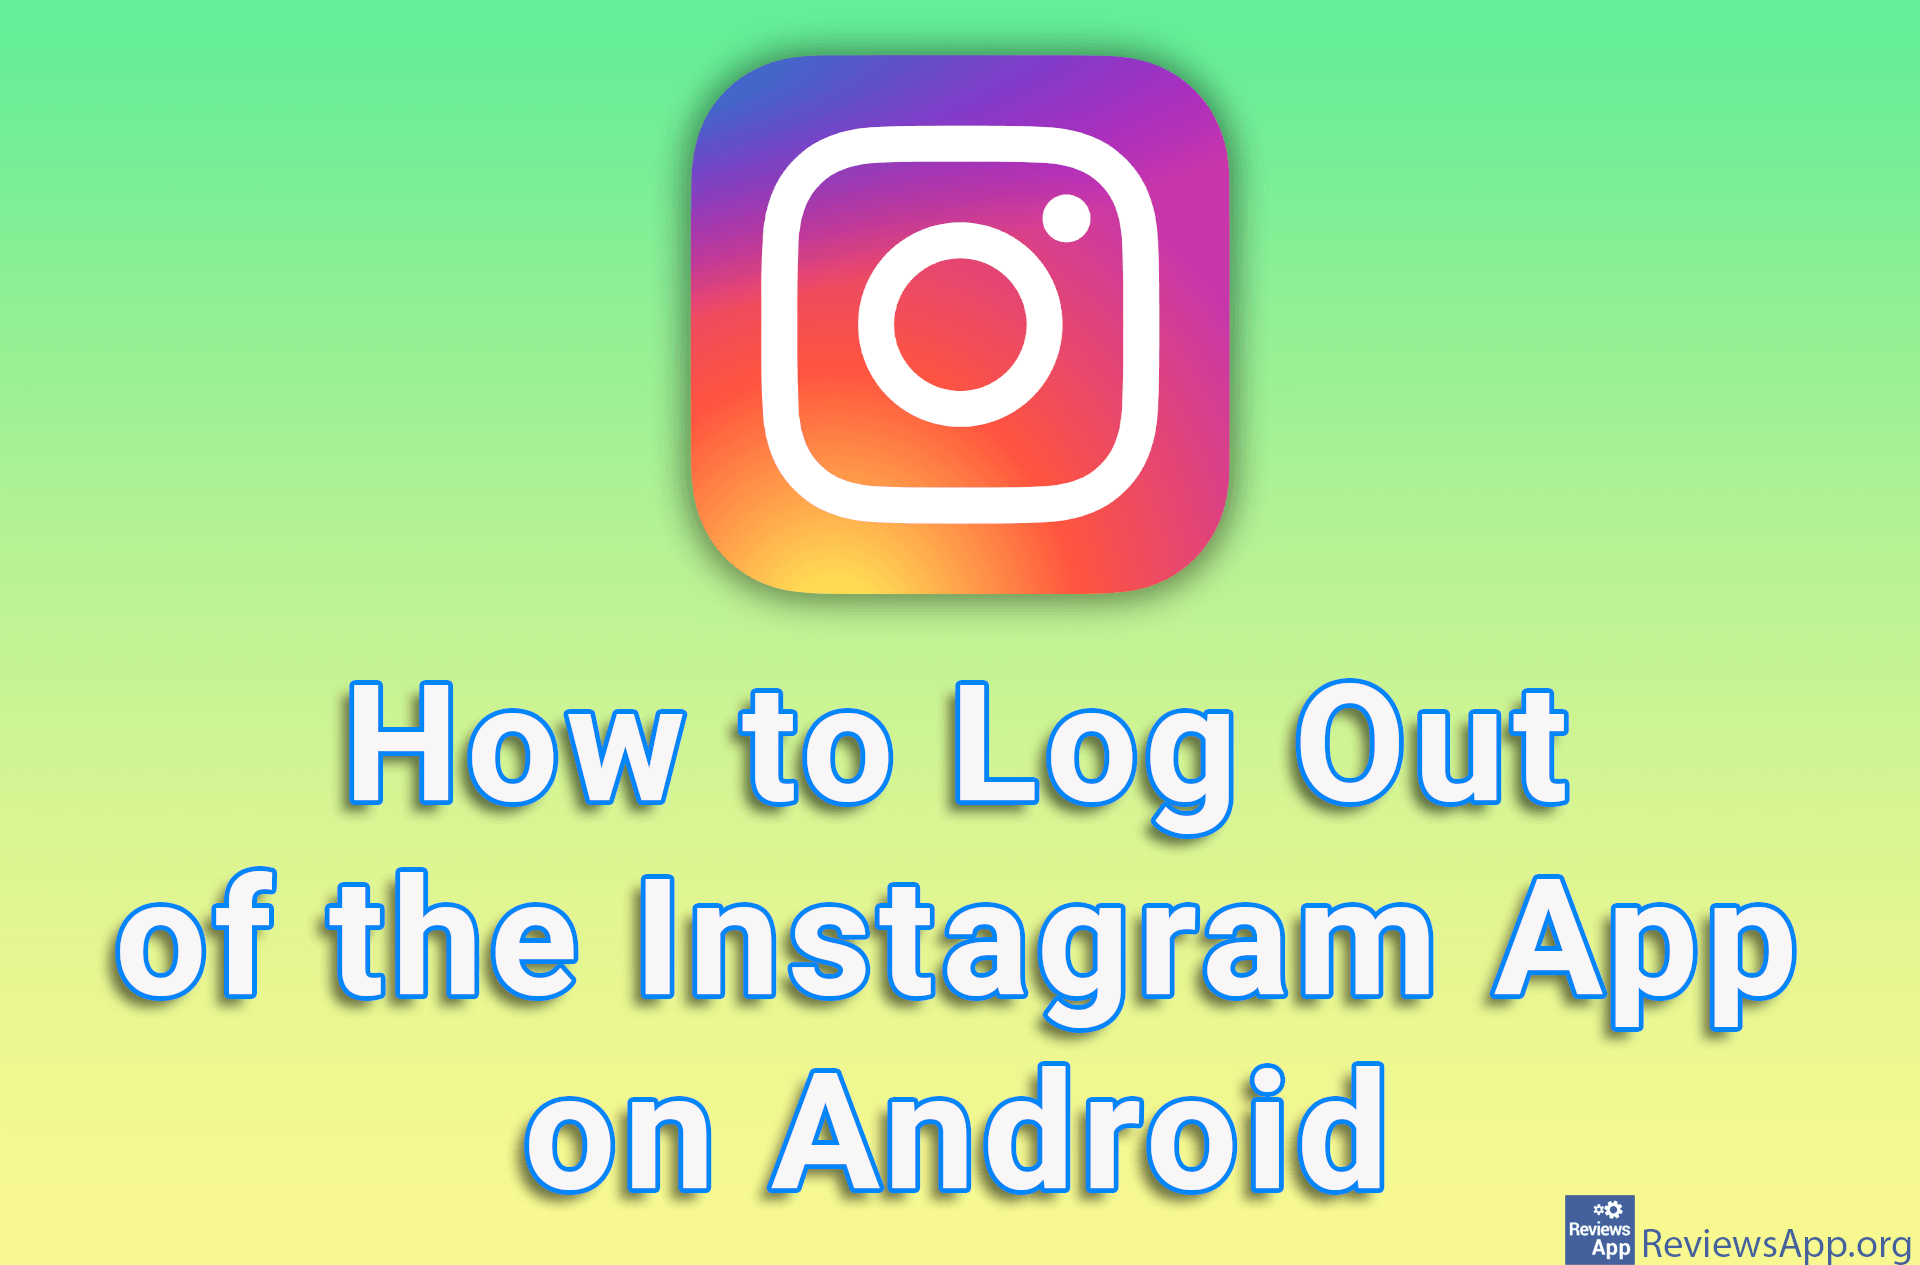 How to Log Out of the Instagram App on Android